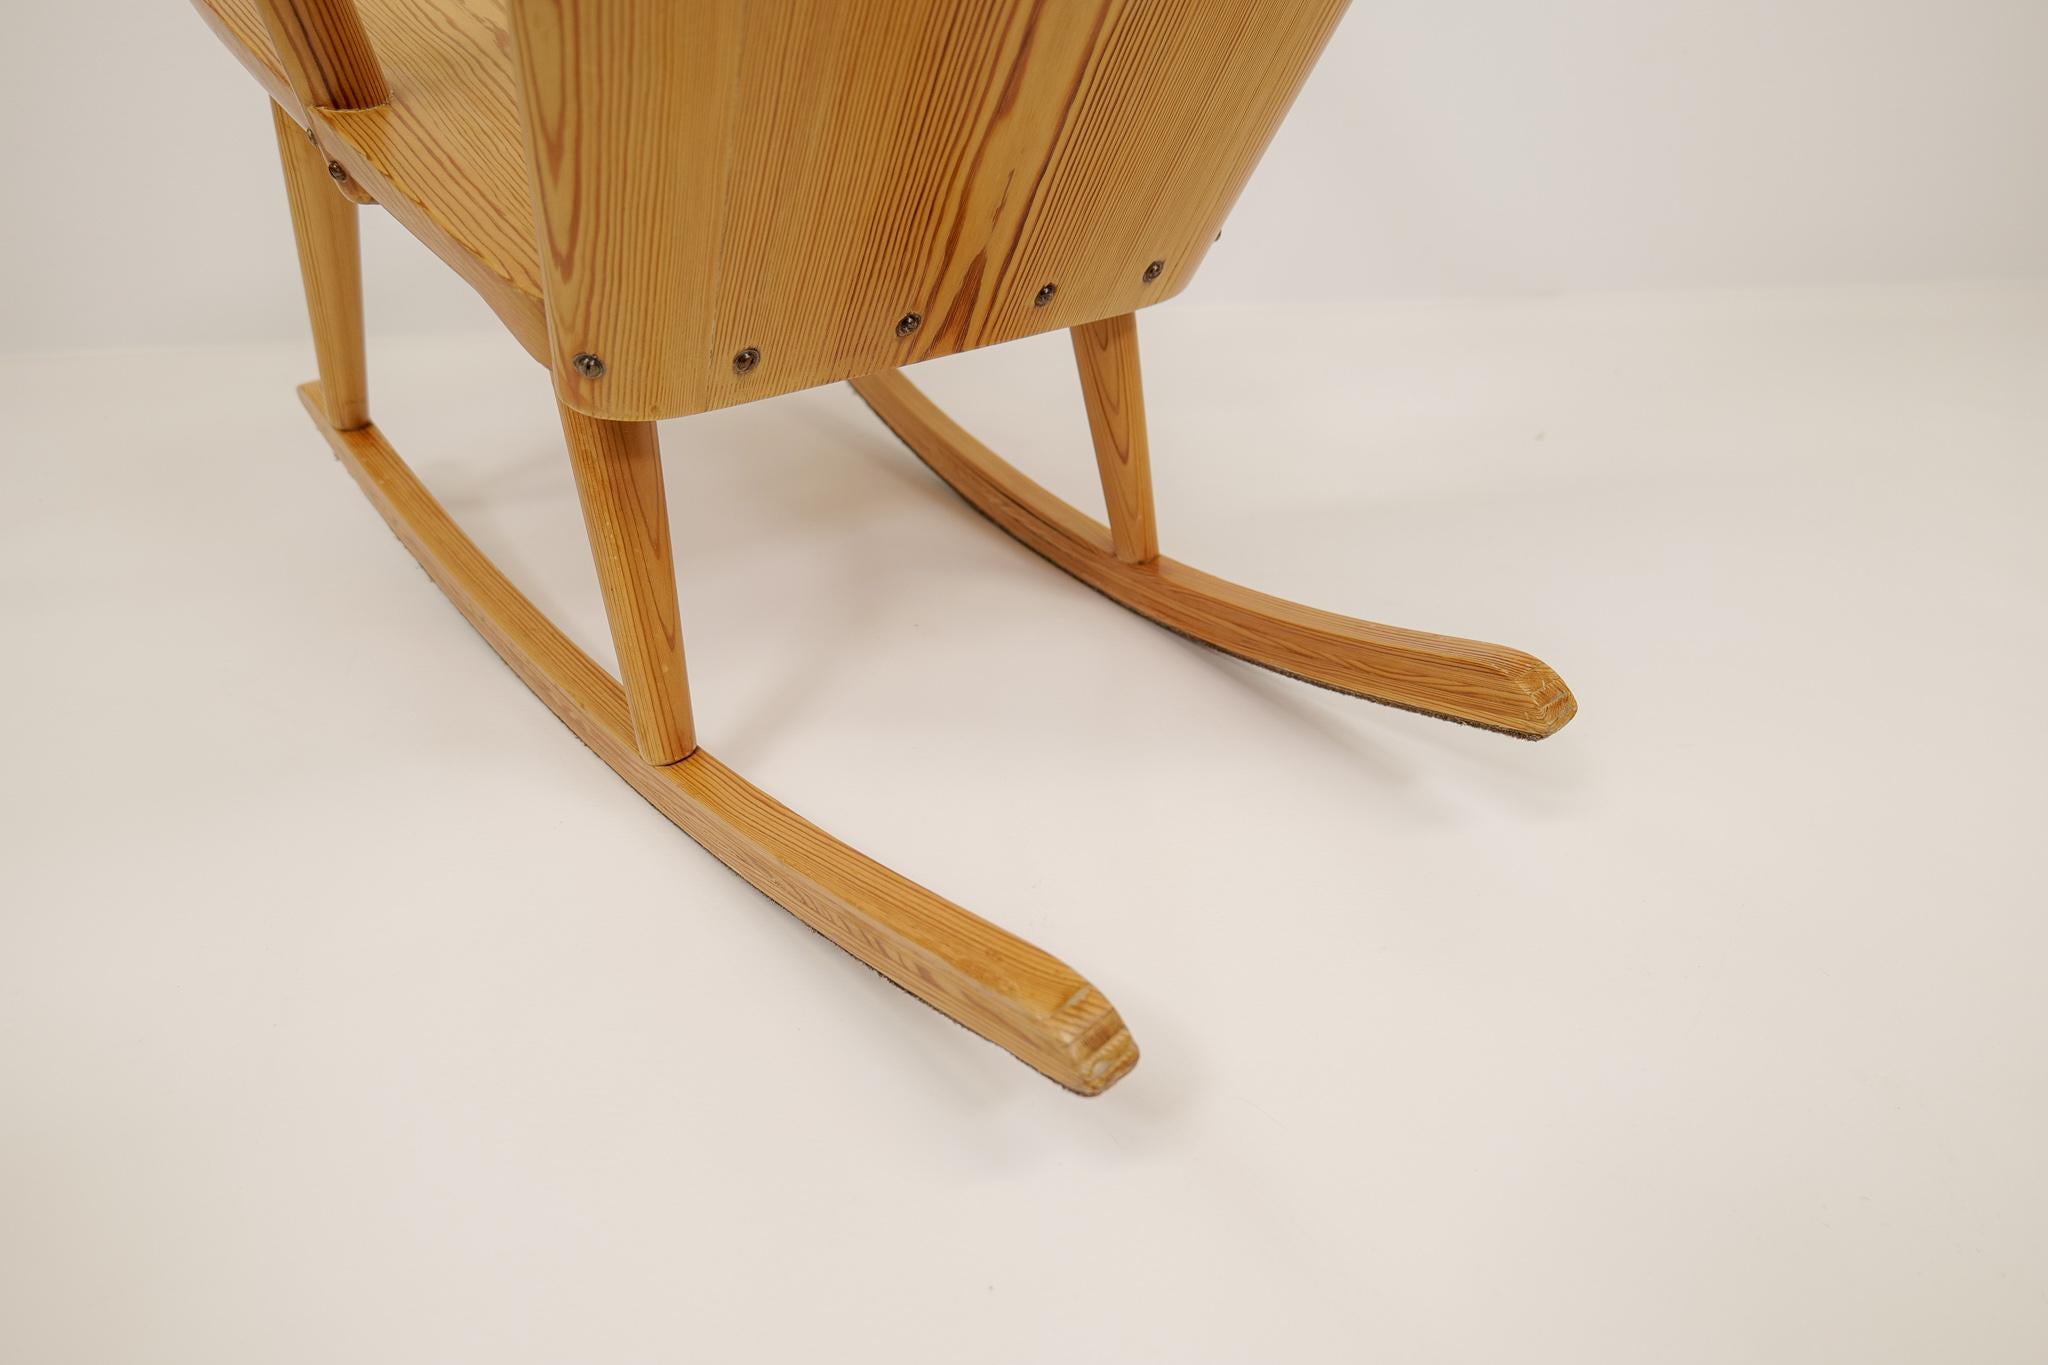 Midcentury Rocking Chair in Pine, Göran Malmvall, Sweden, 1940s For Sale 4